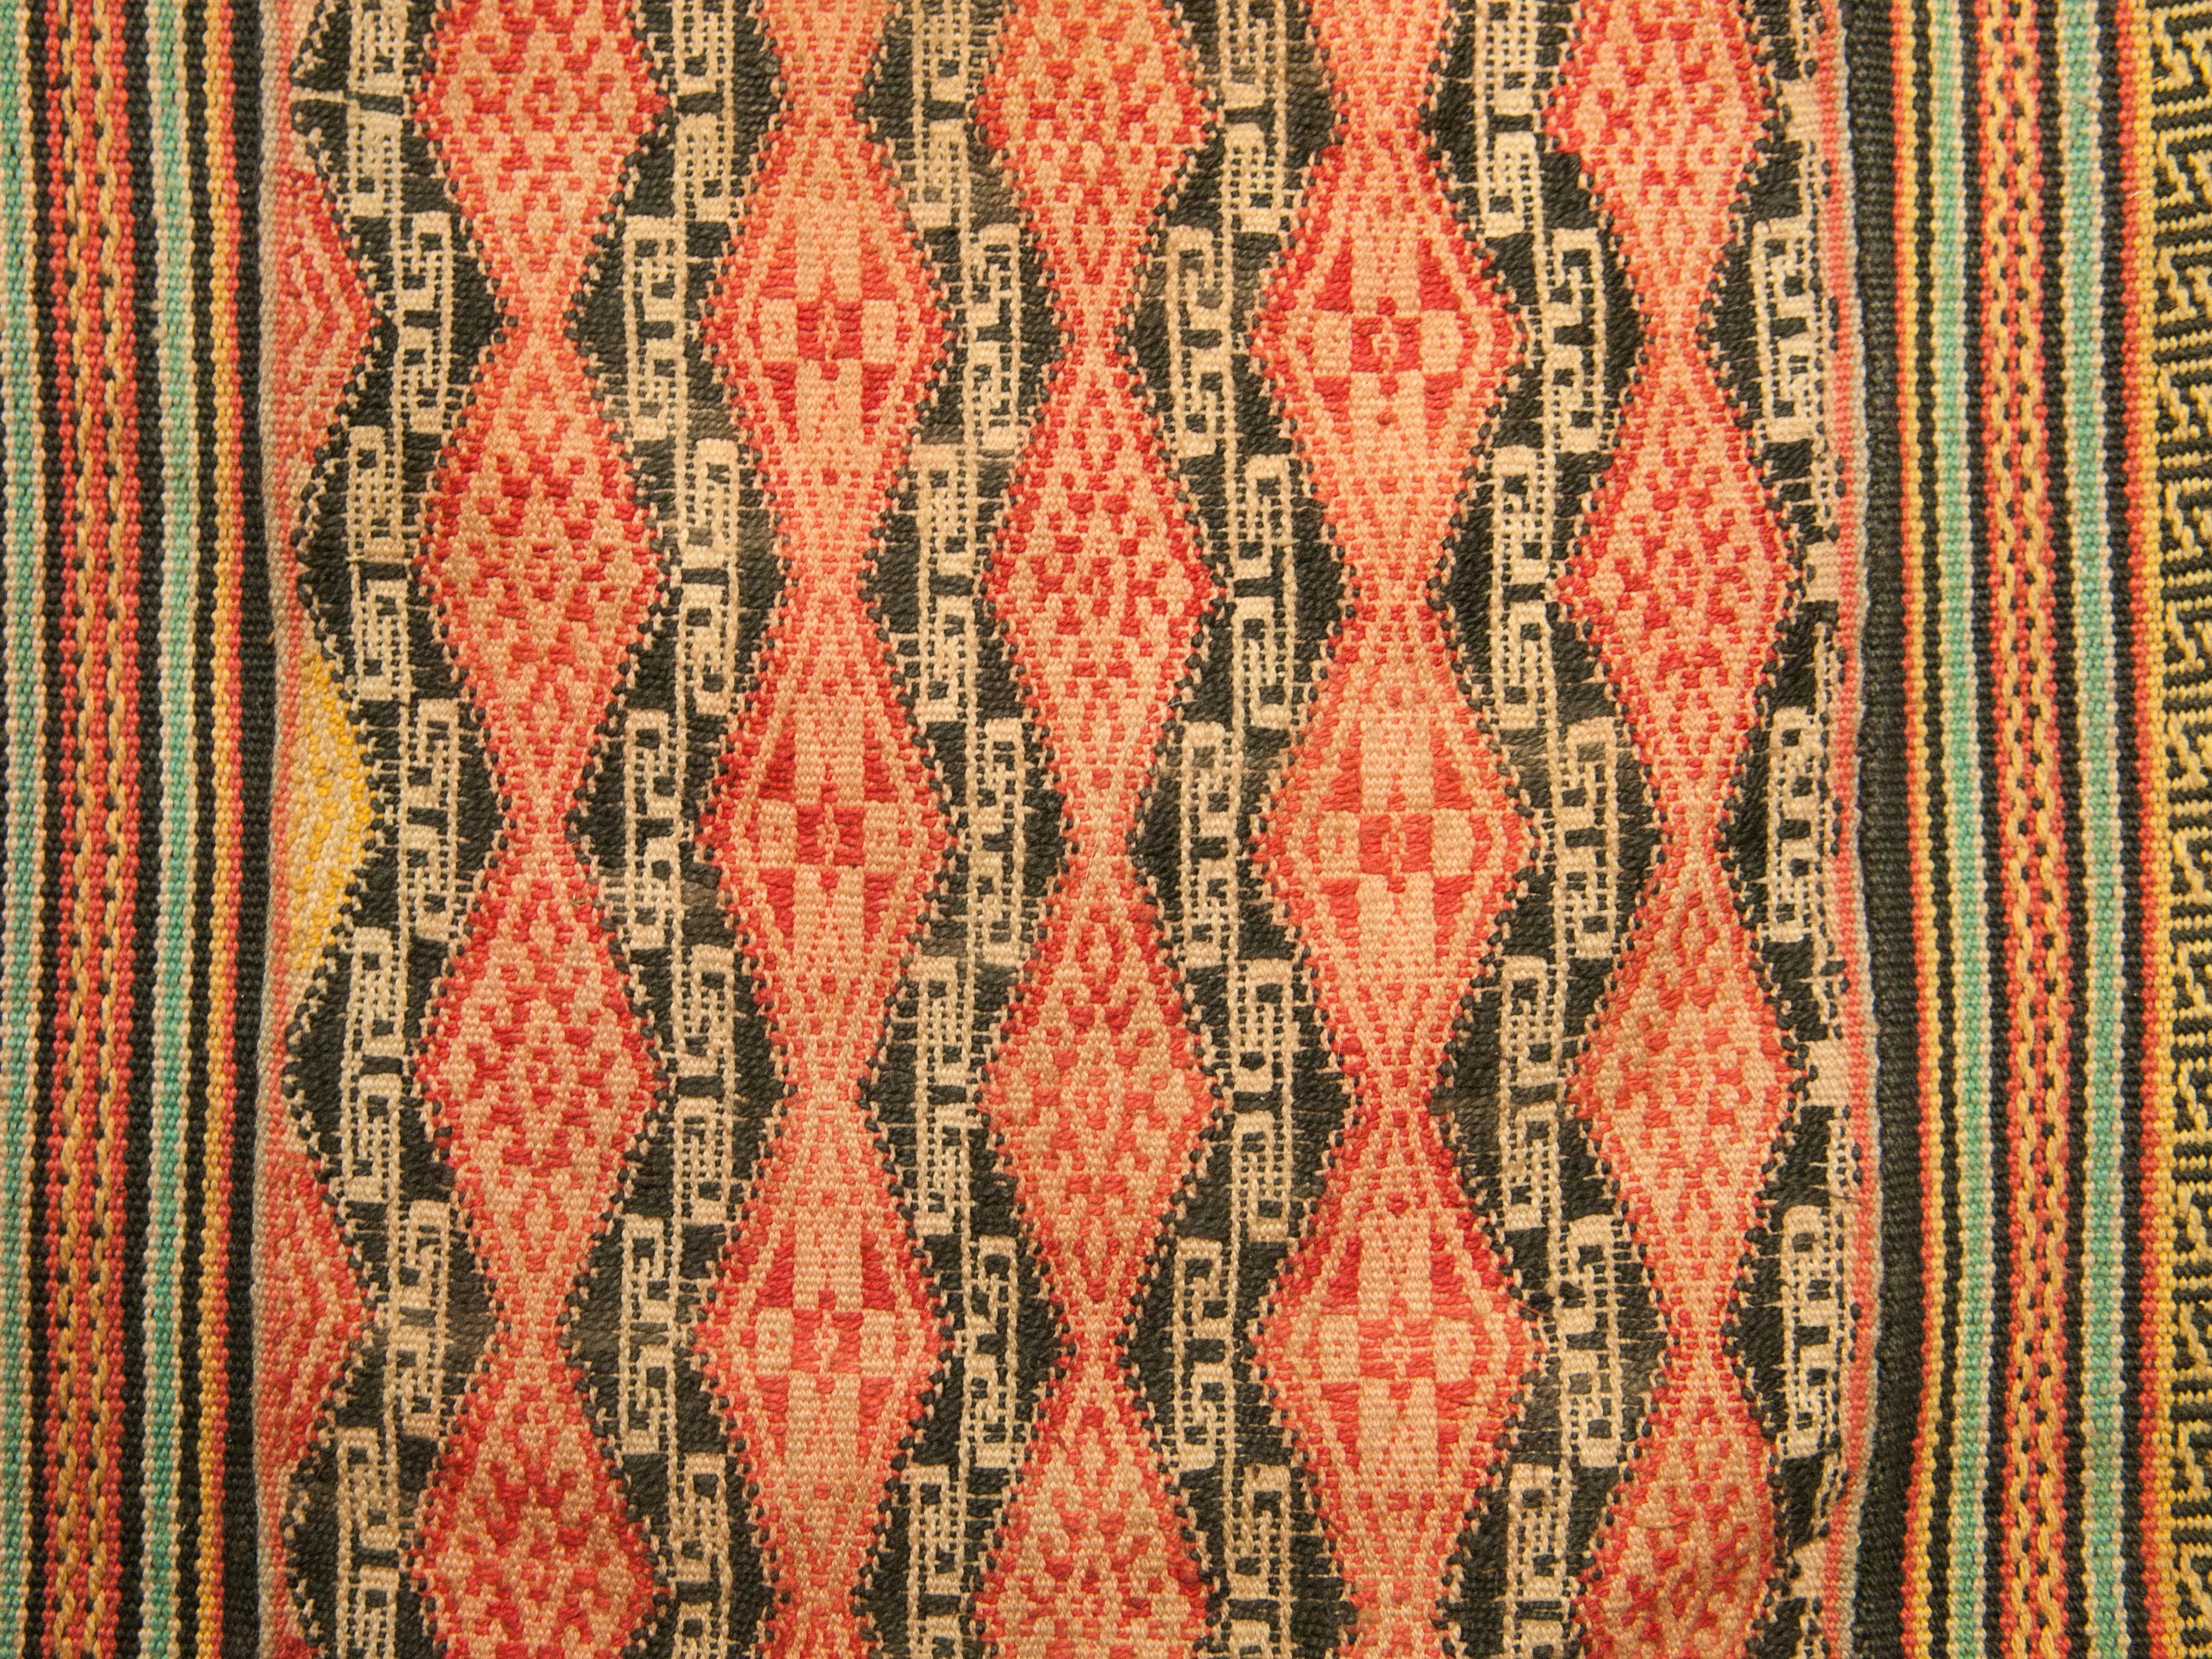 Dyed Handwoven Cotton Sarong Textile Central Highlands, Vietnam, Mid-20th Century